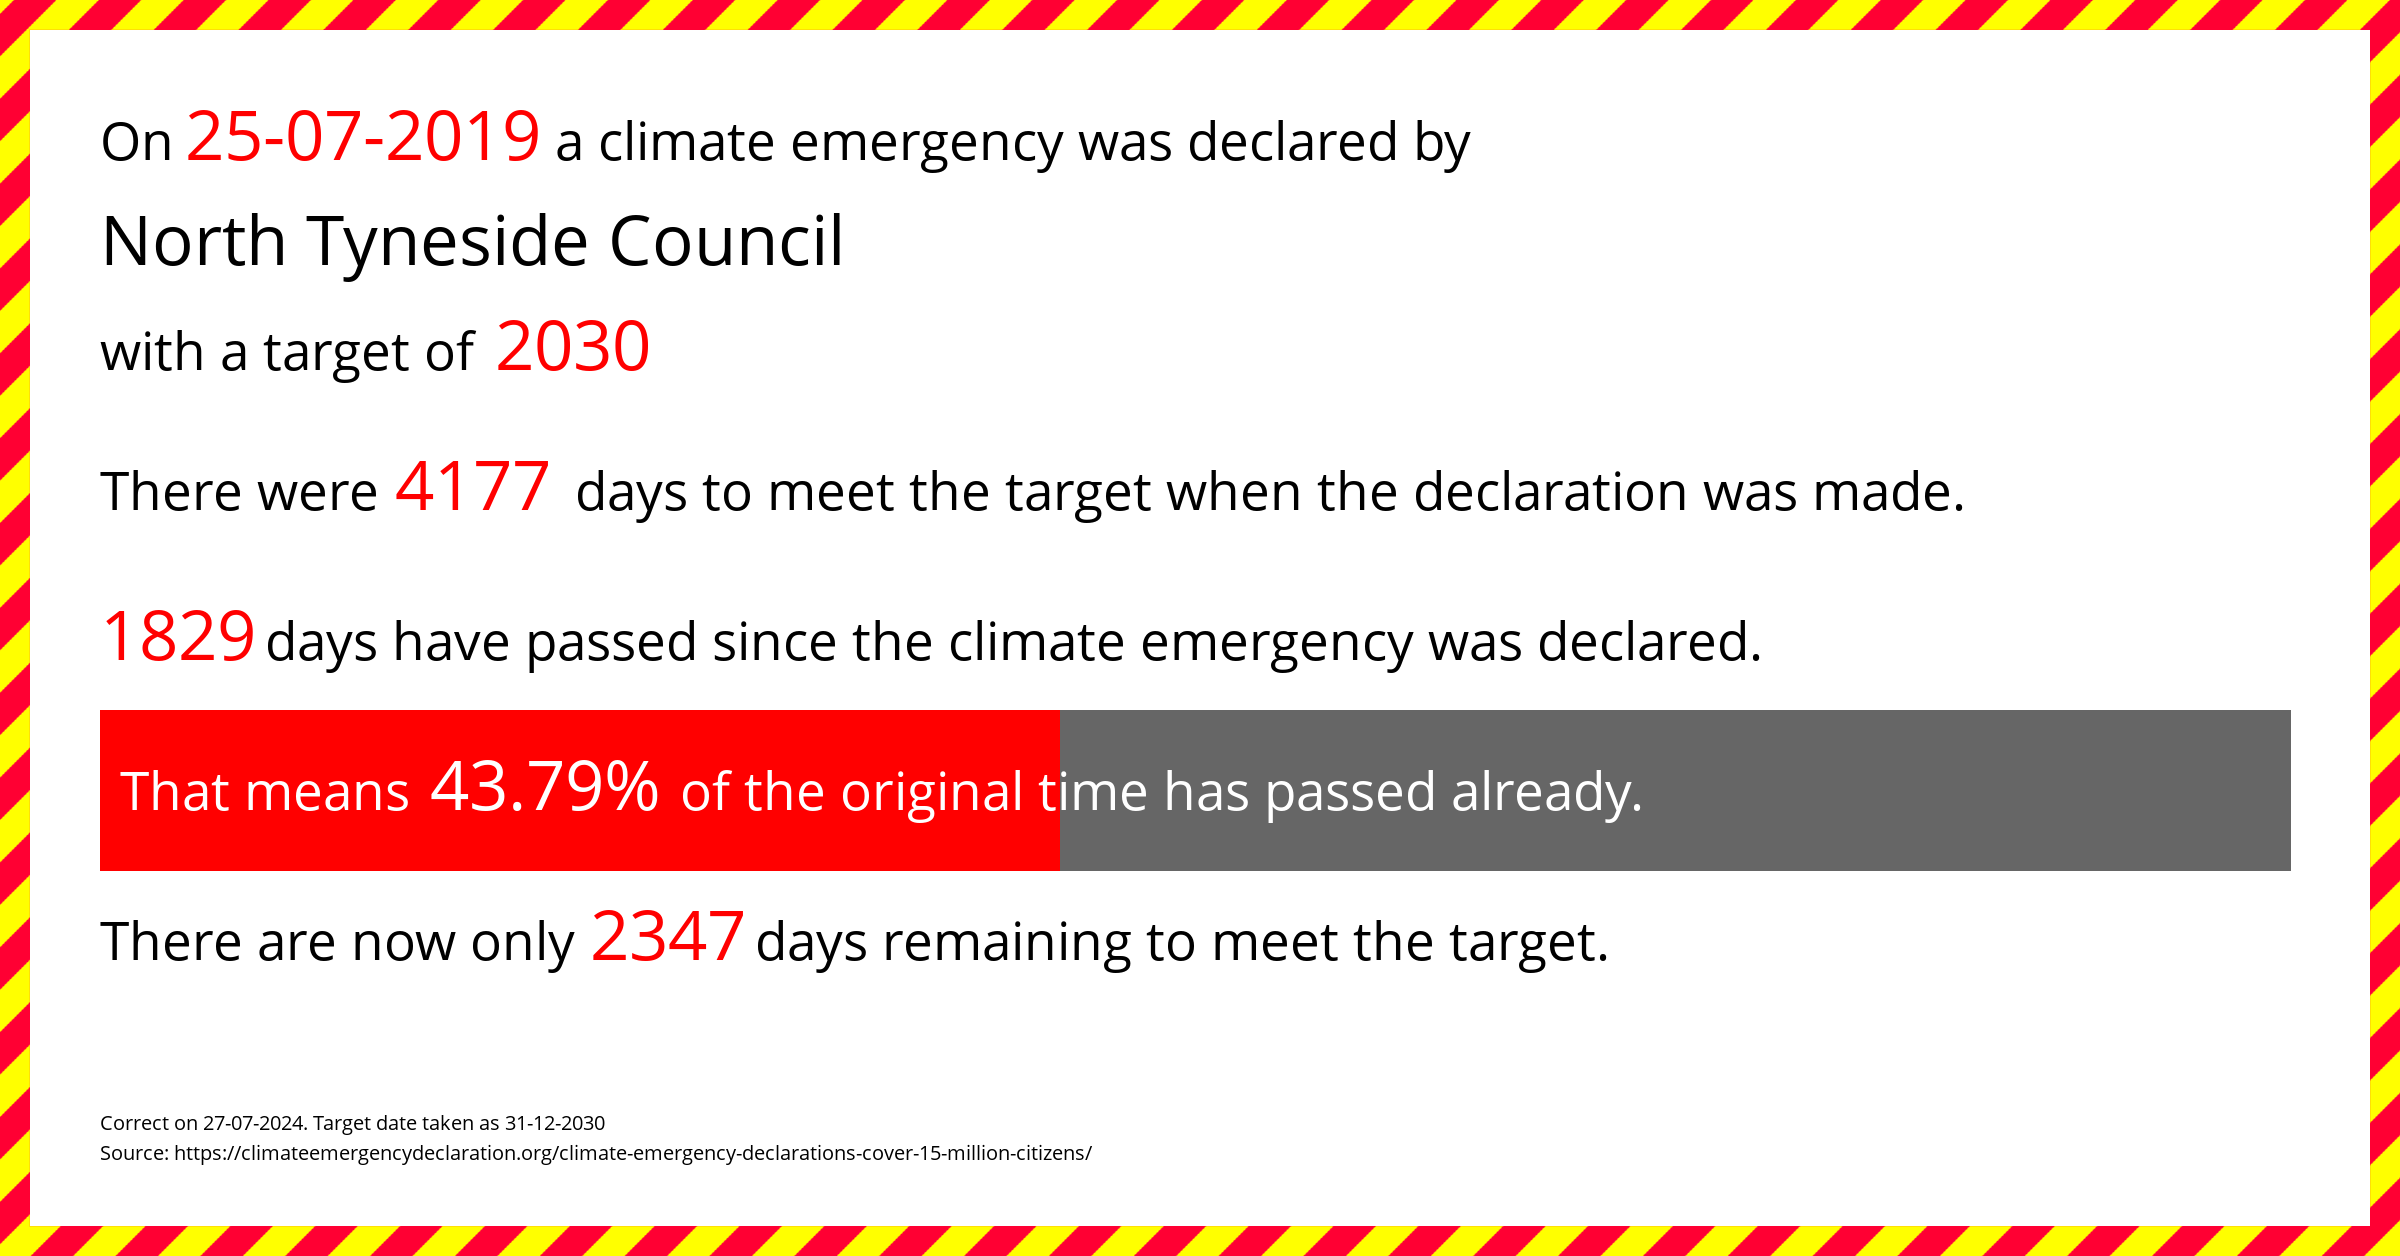 North Tyneside Council declared a Climate emergency on Thursday 25th July 2019, with a target of 2030.